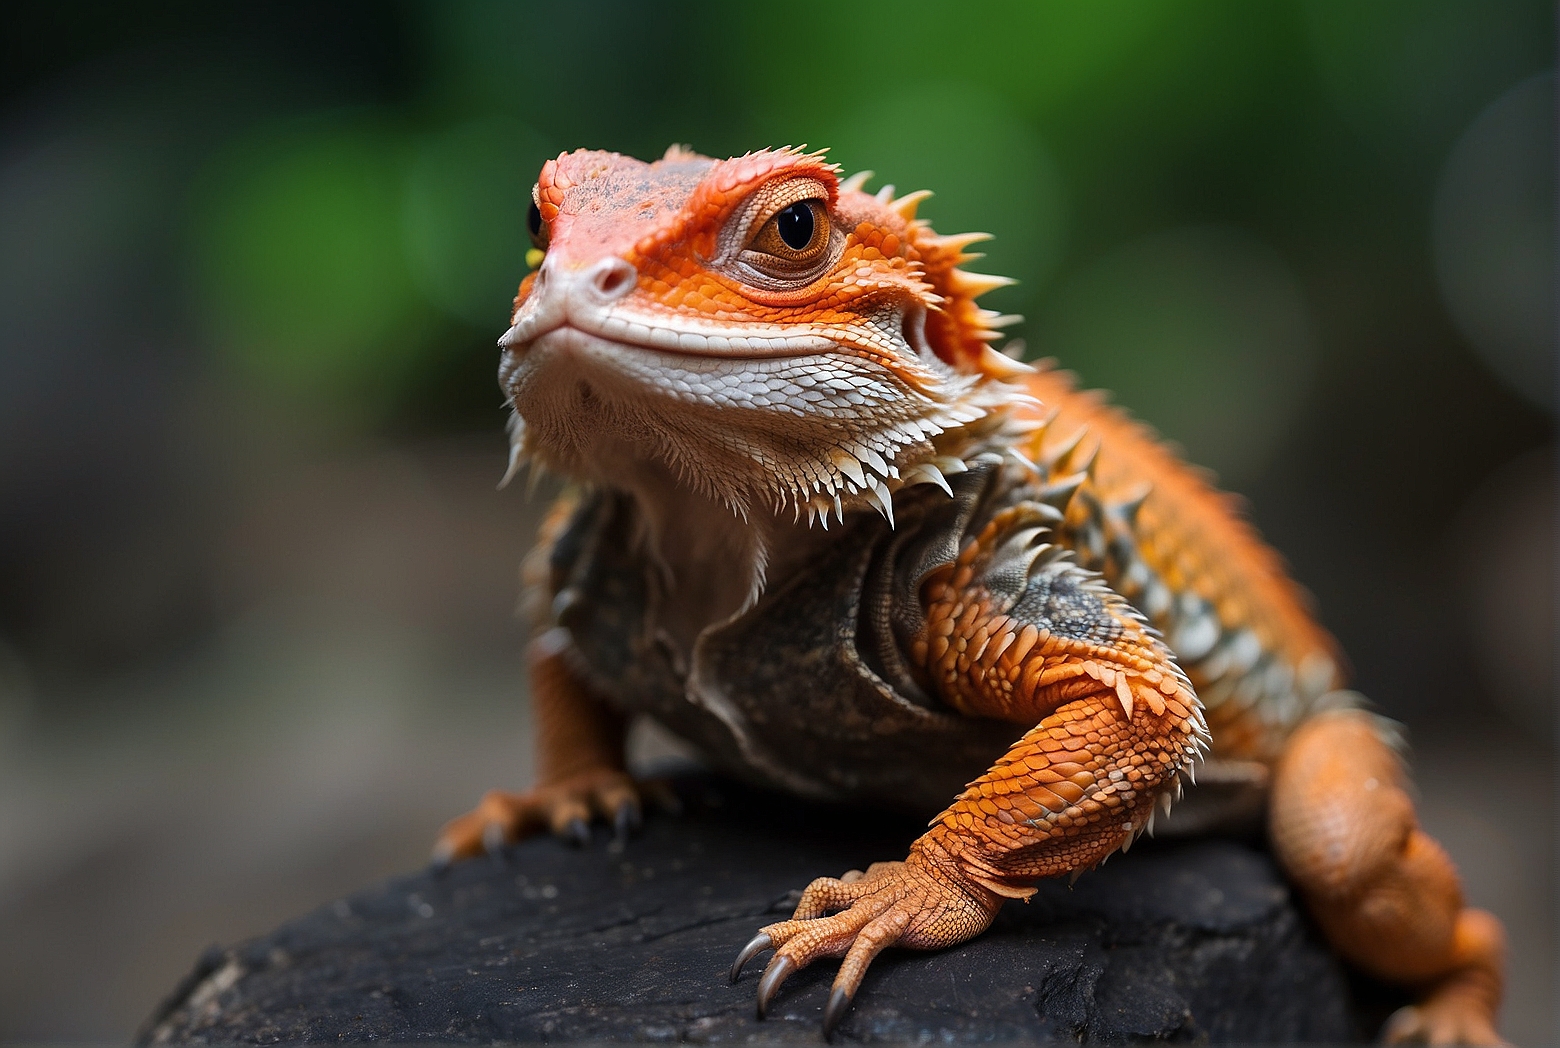 What Should You Not Do To Your Bearded Dragon?